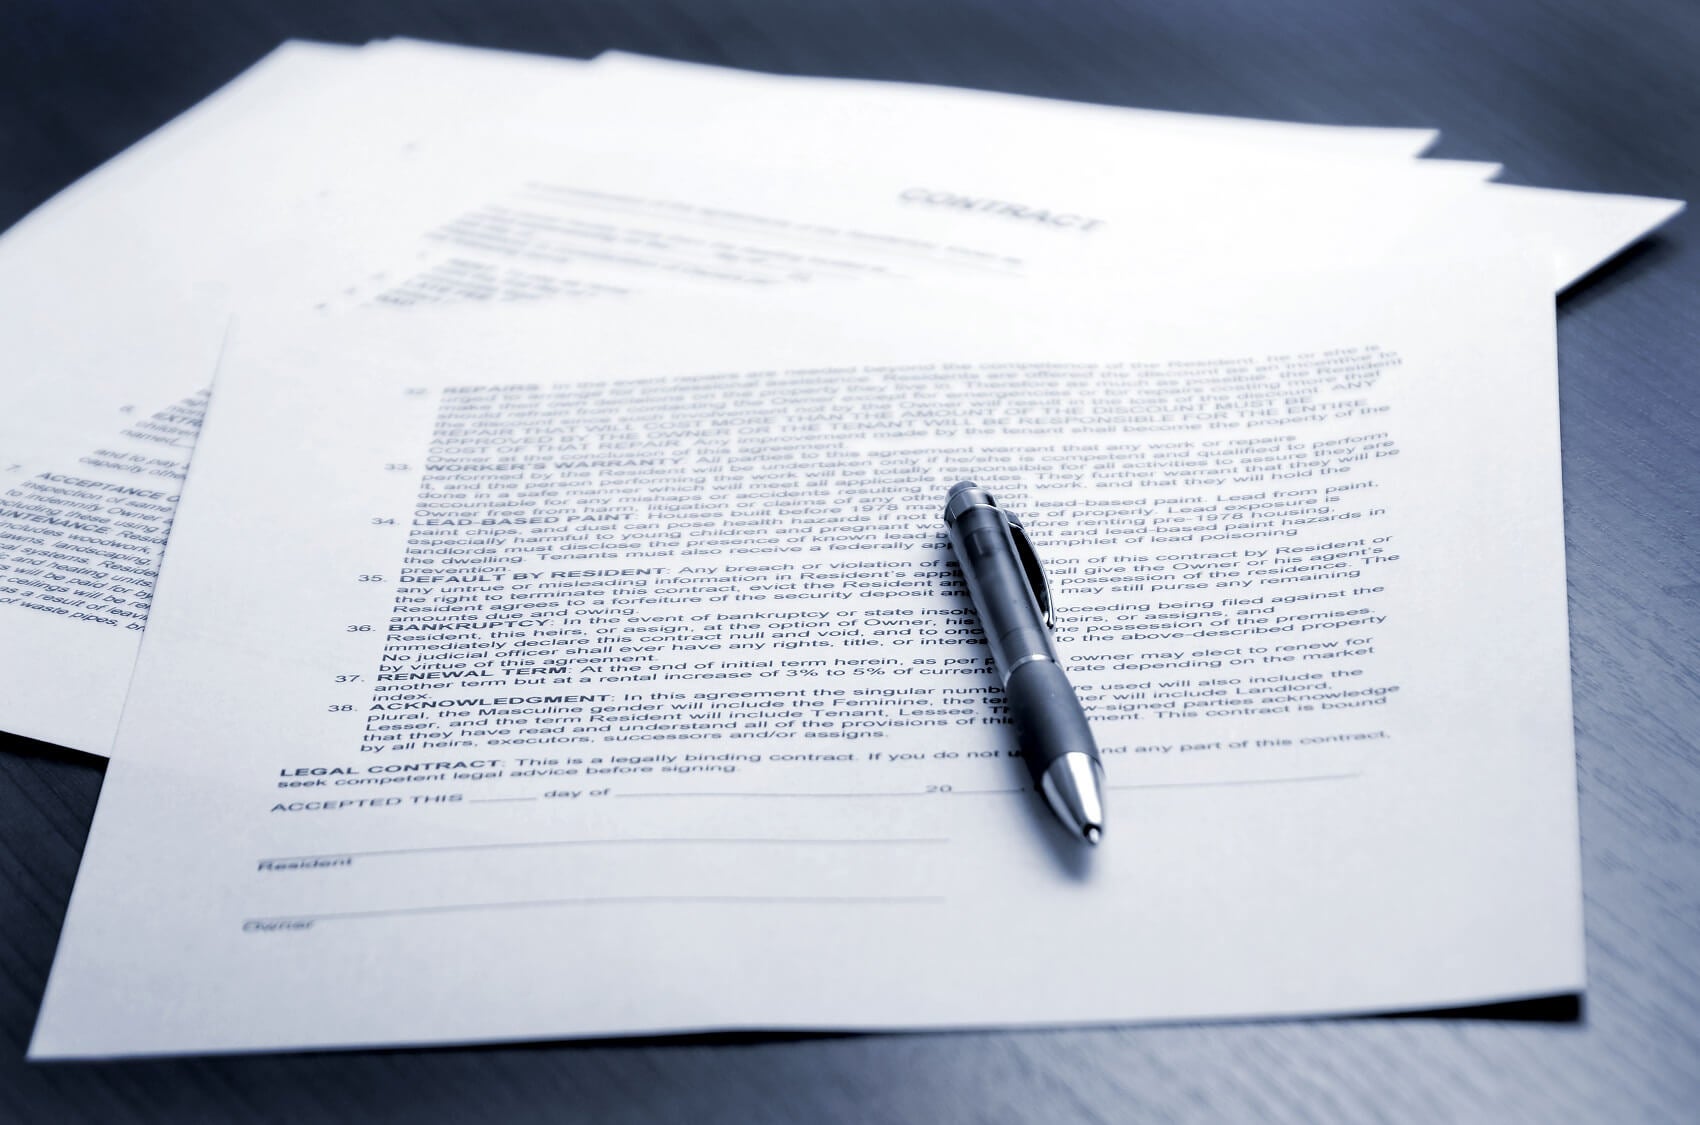 Financial papers representing lease agreement placed on a table with pen